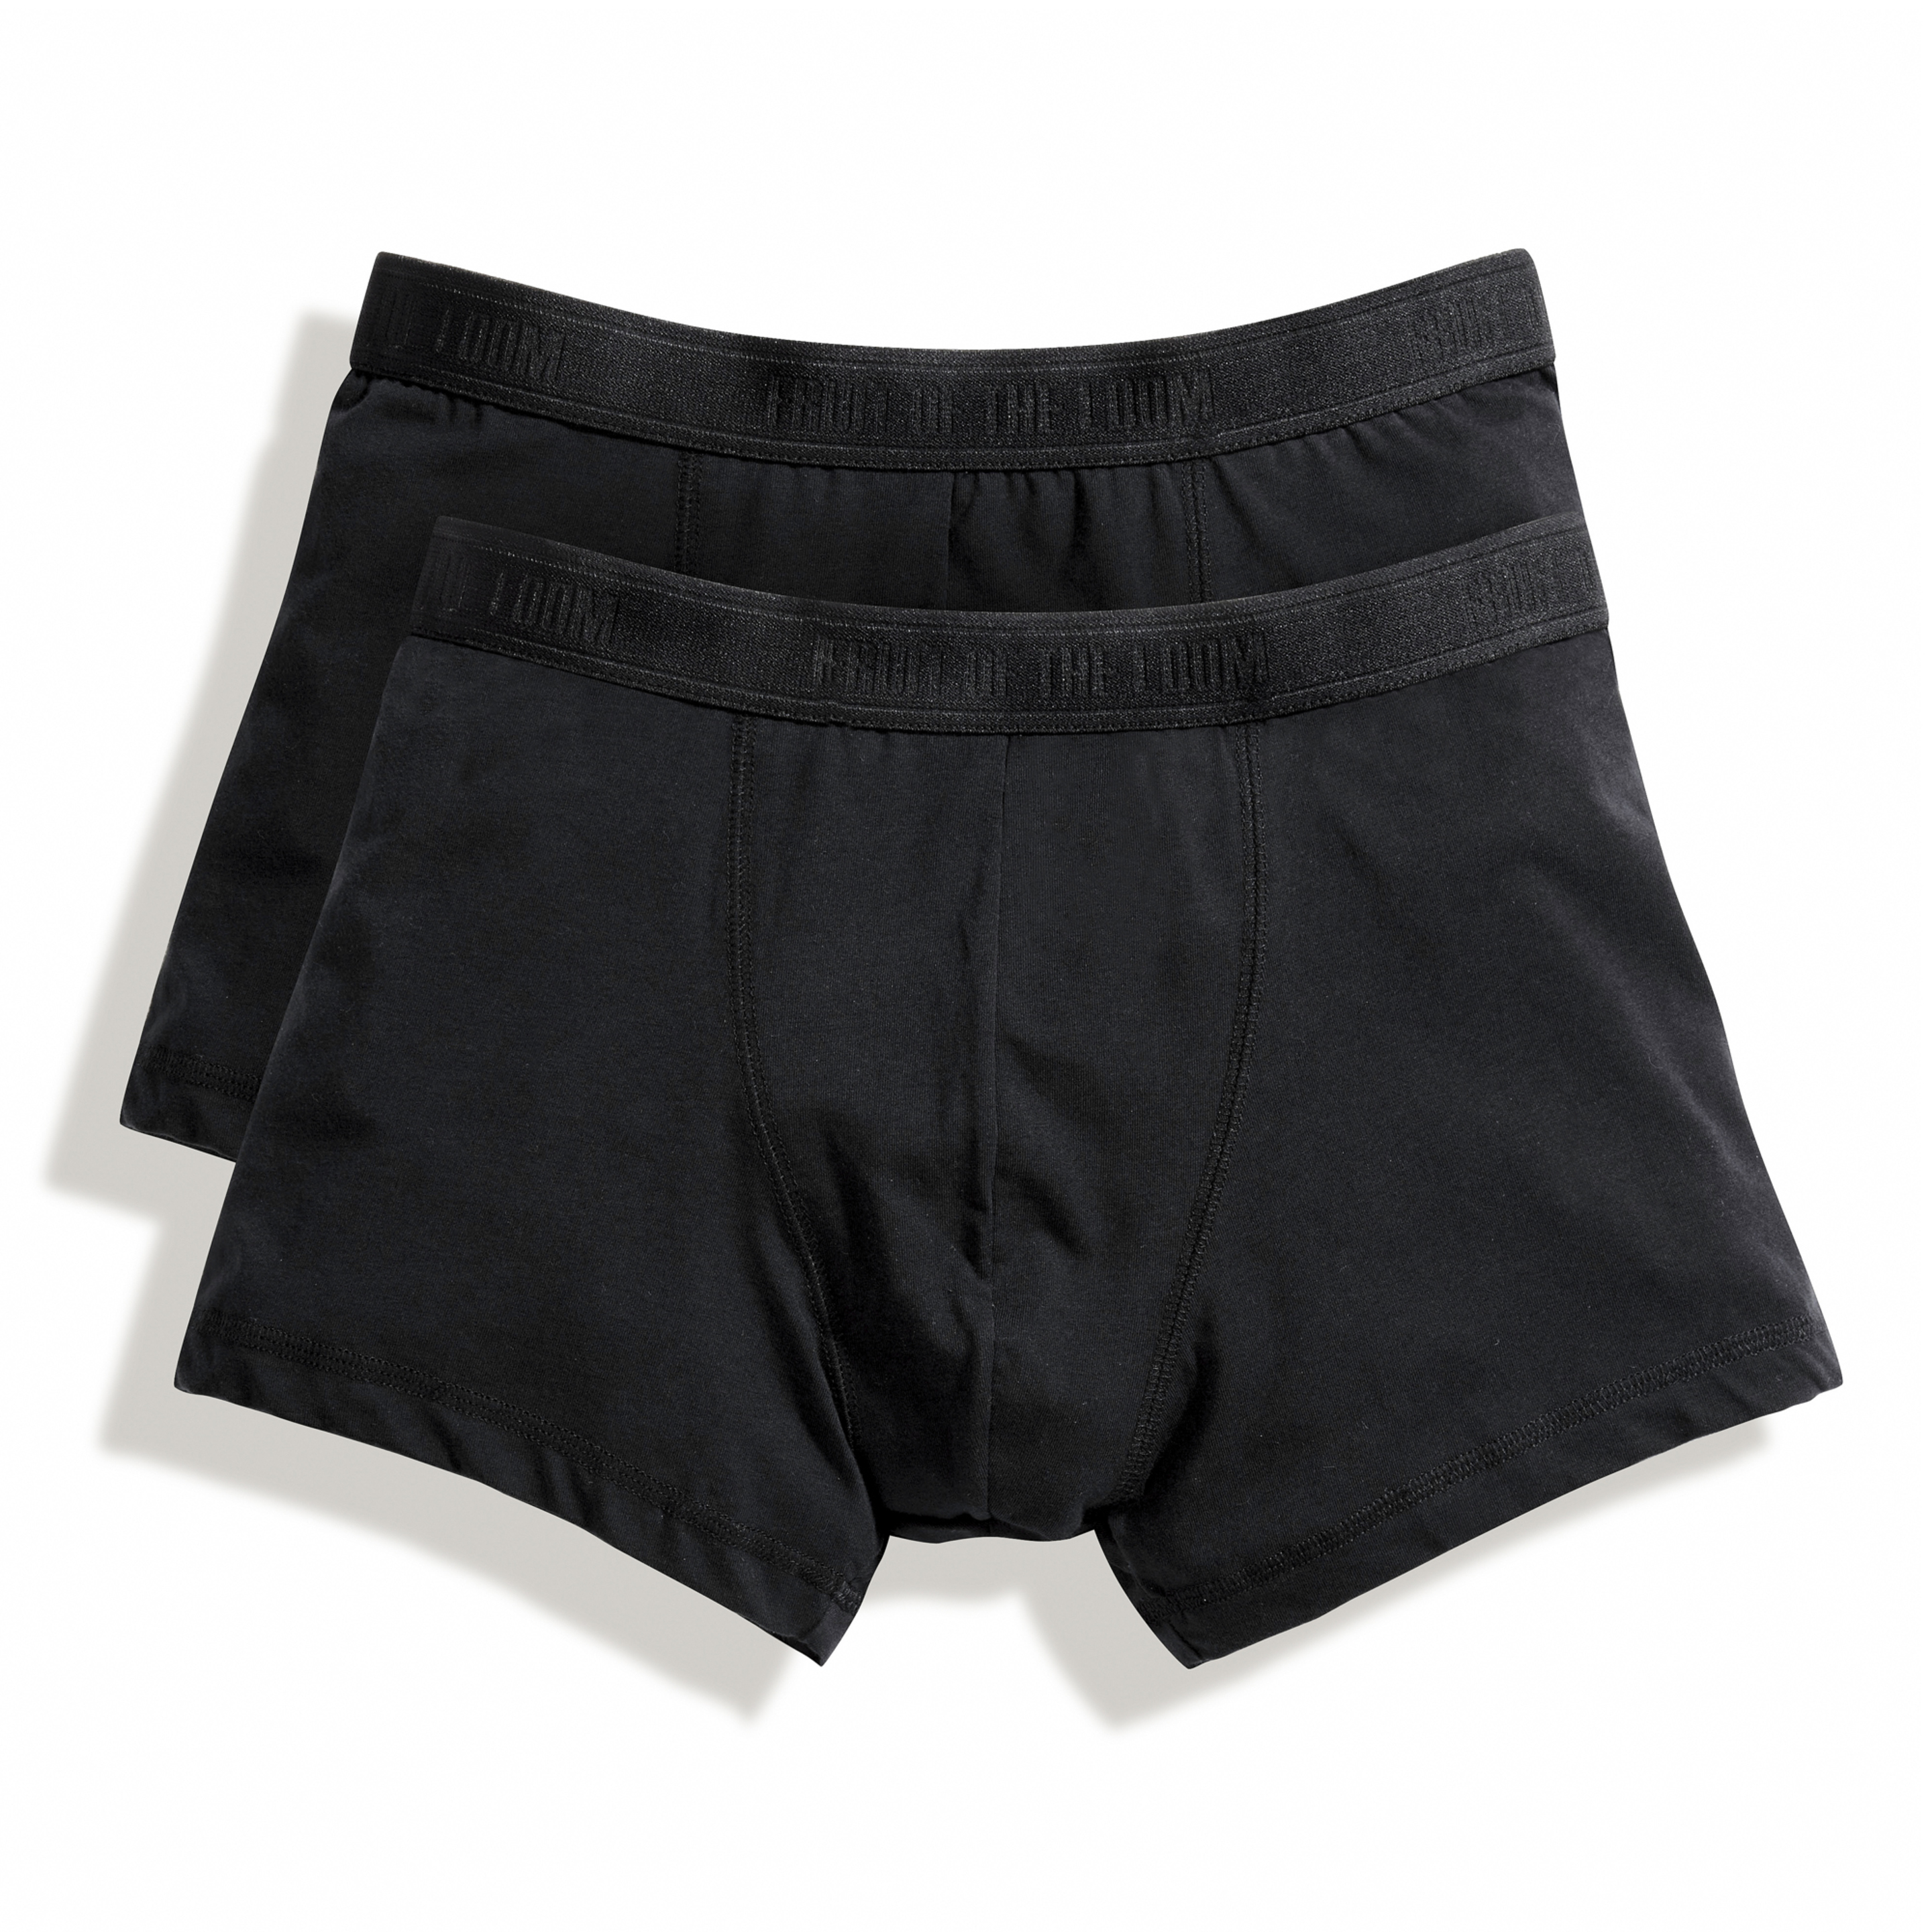 Calzoncillos Boxer Fruit Of The Loom Classic Shorty (pack De 2) - negro - 